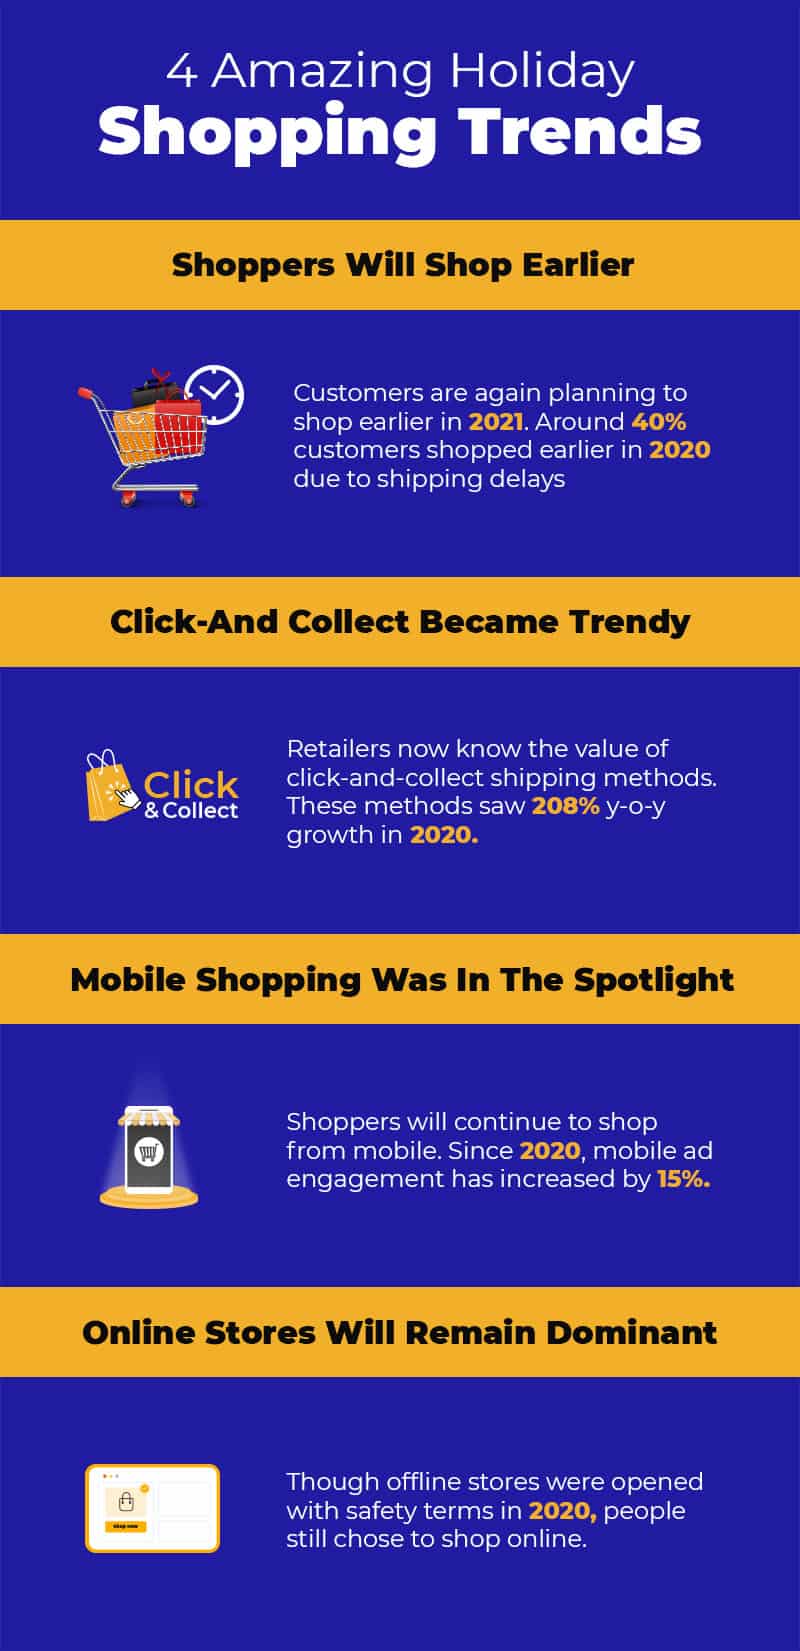 holiday shopping trends